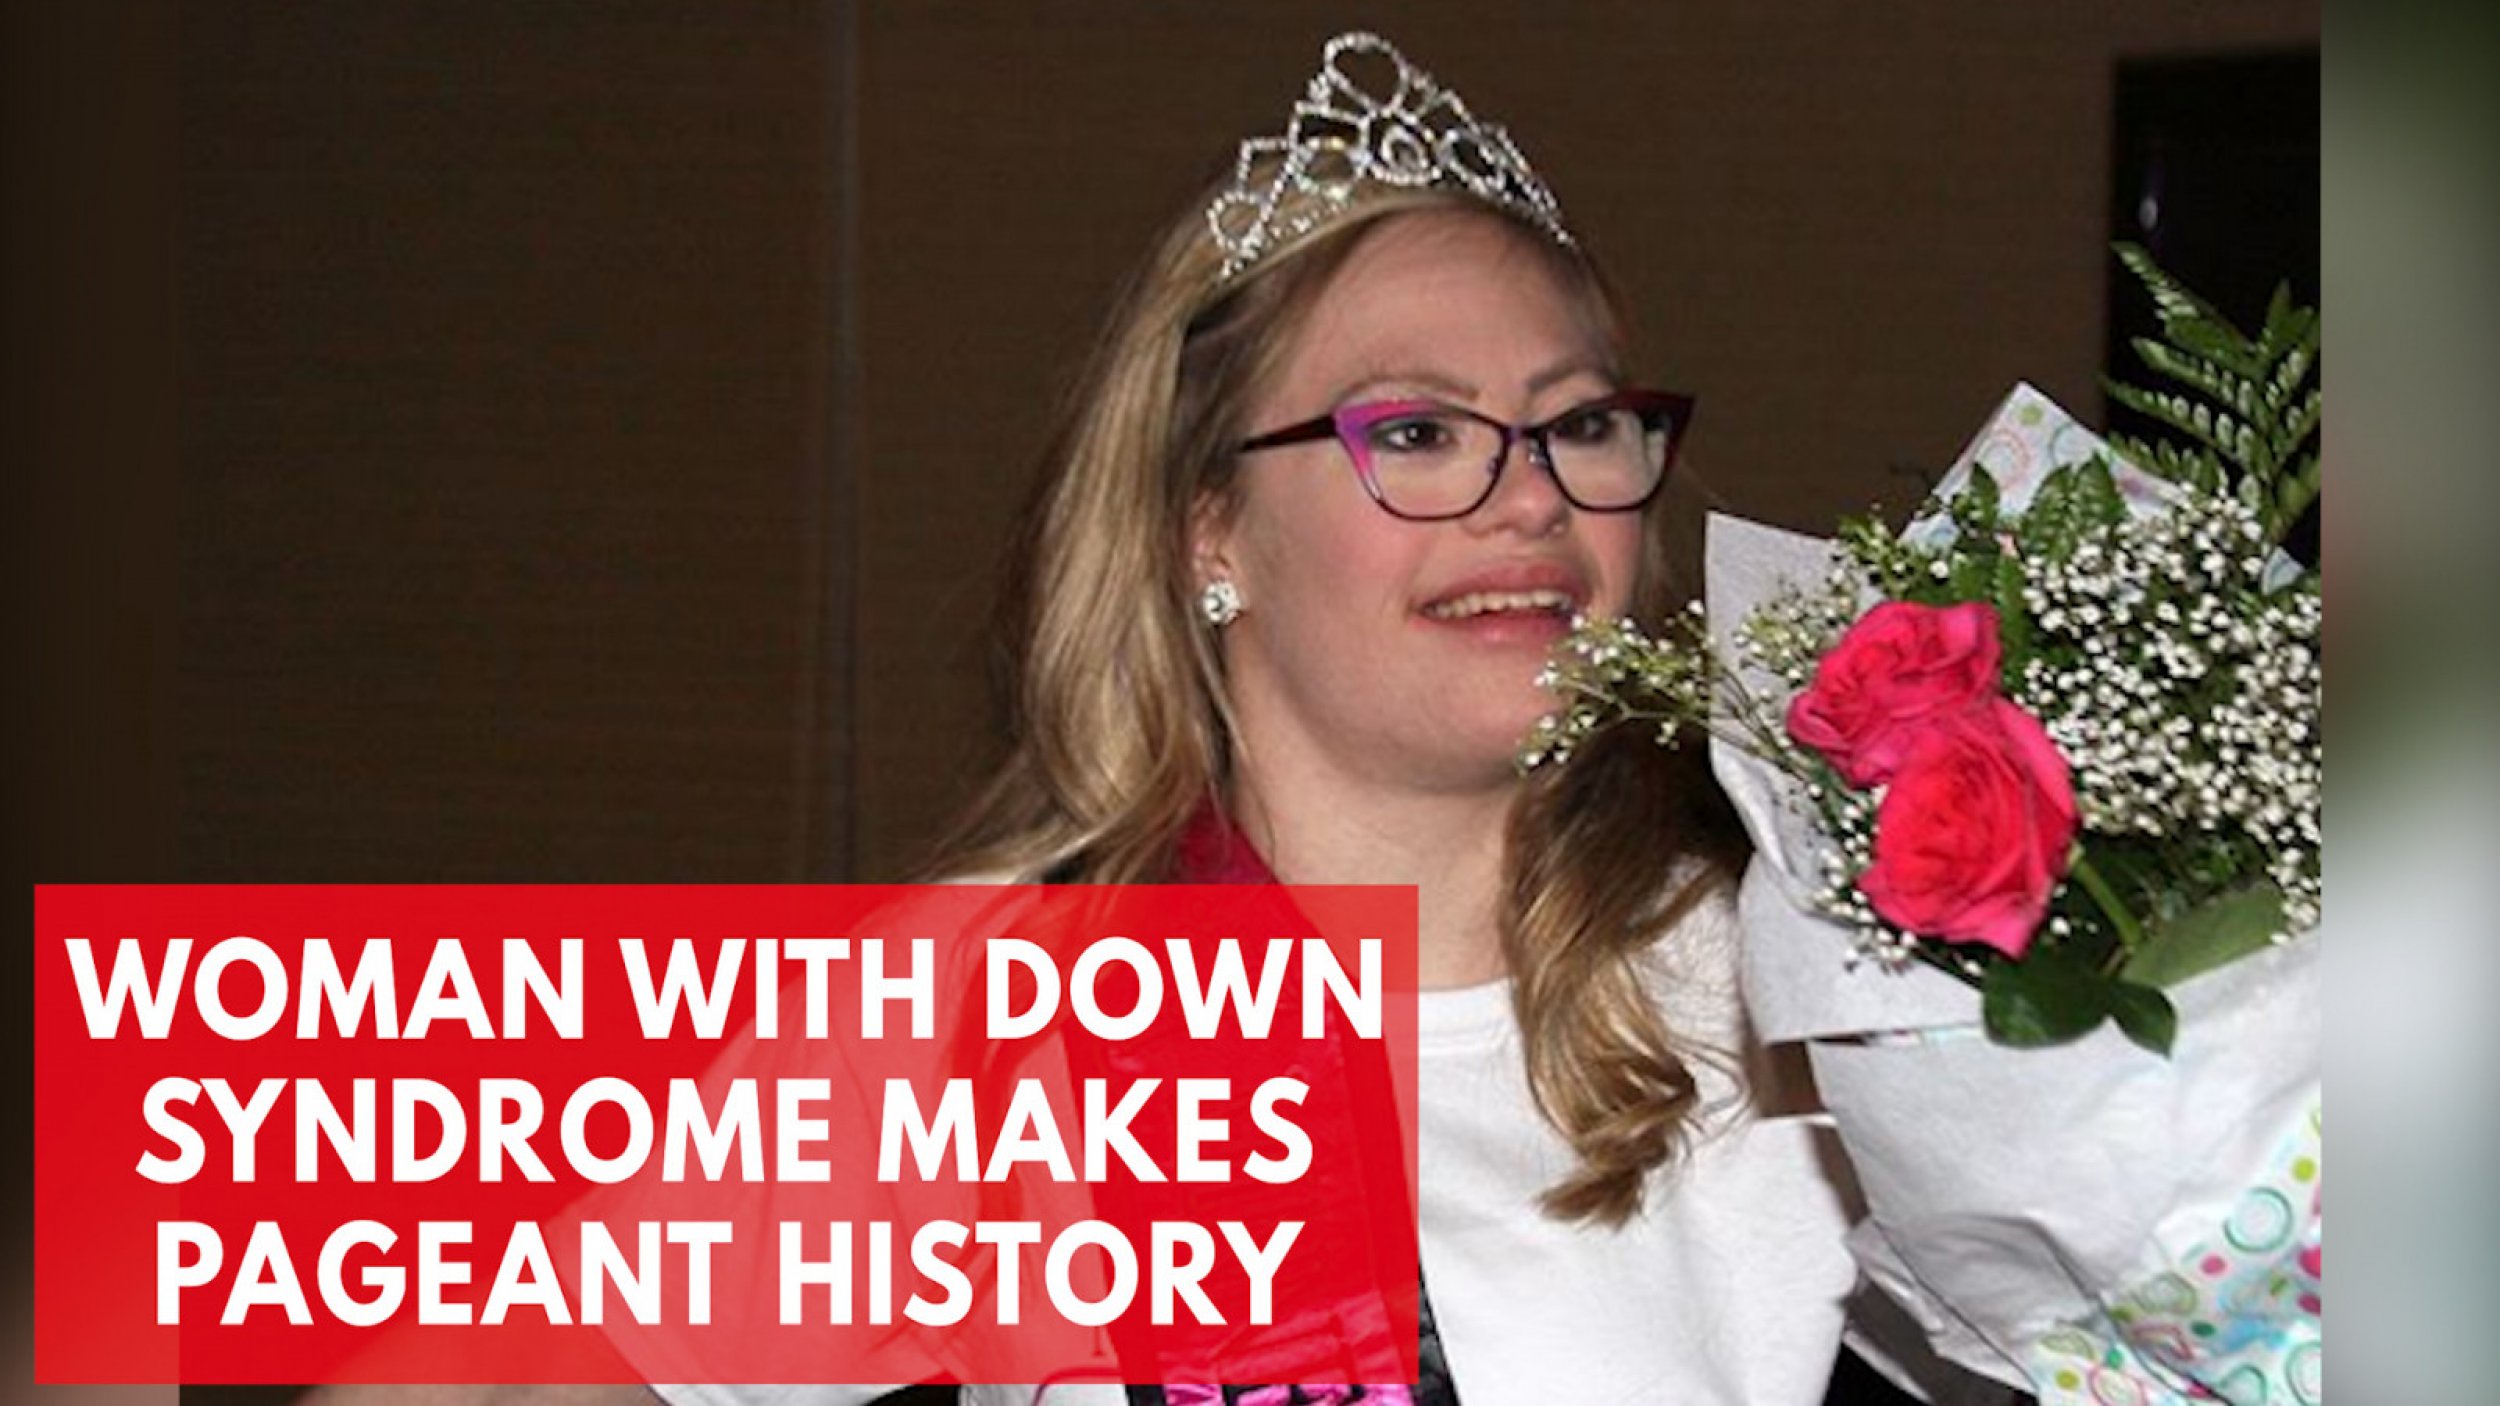 Mikayla Holmgren Becomes First Woman With Down Syndrome To Compete in Miss Minnesota USA Pageant